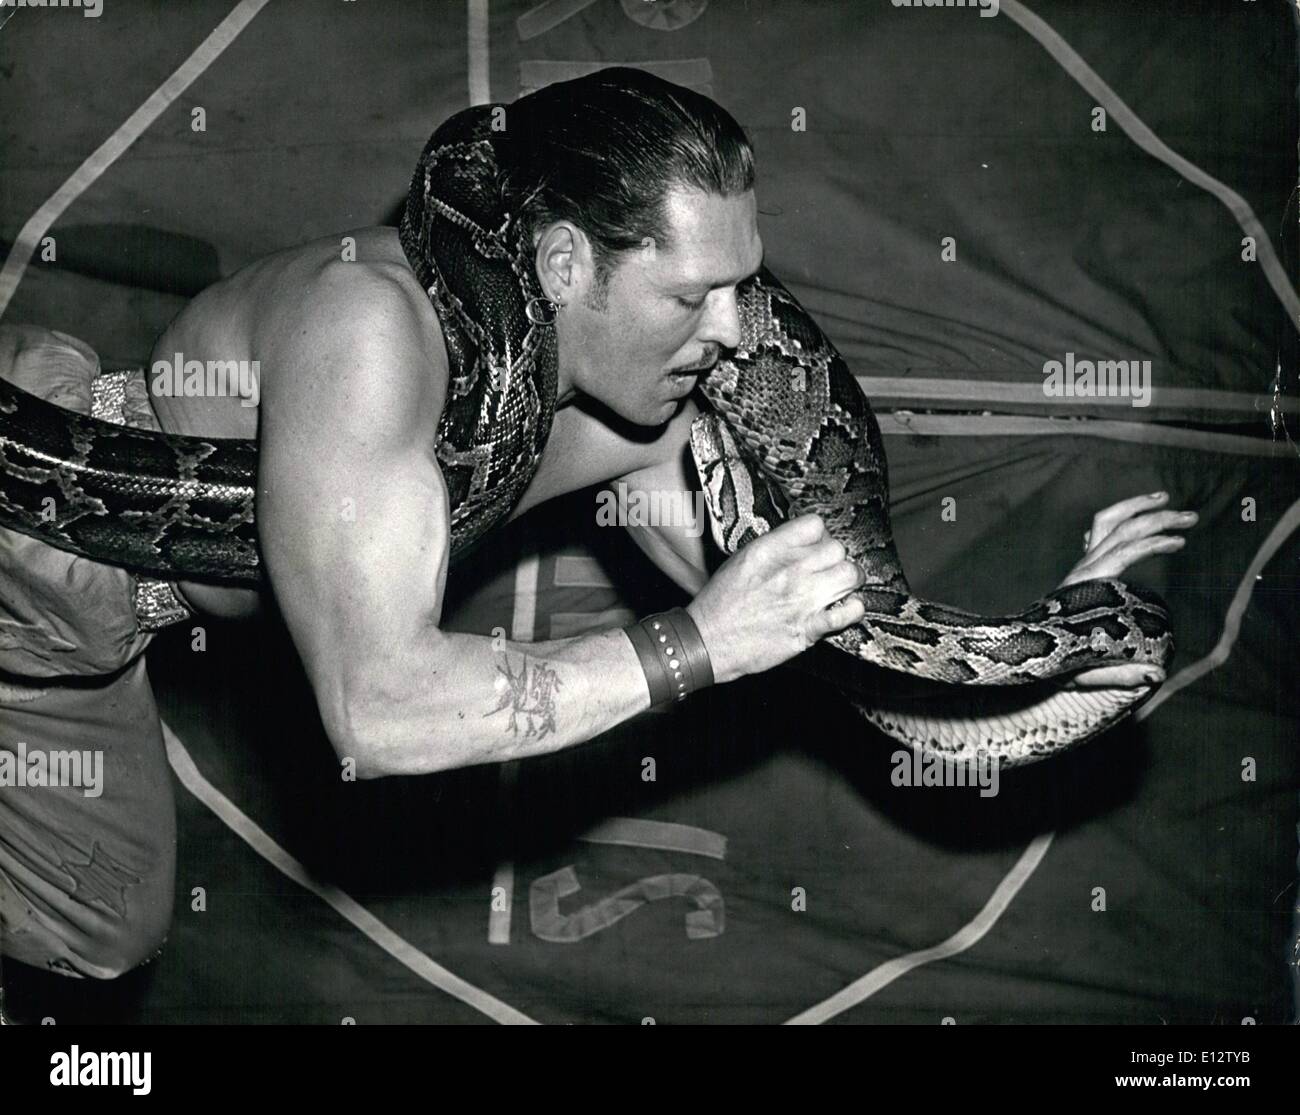 The Kiss Death Pyhton Biggest Snake In Fairground Business High Resolution Stock Photography And Images Alamy